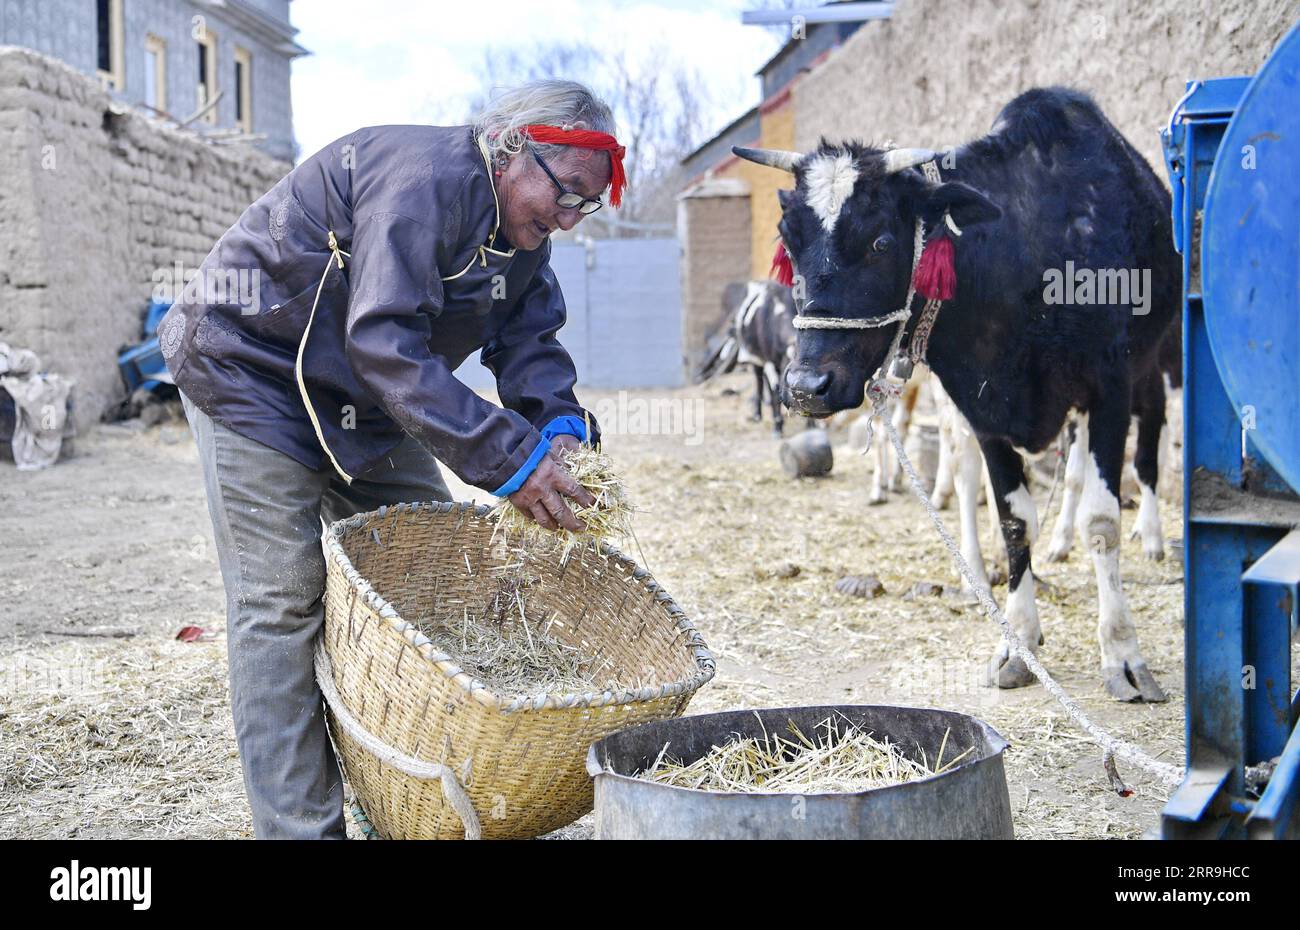 210617 -- LHASA, June 17, 2021 -- Sonam feeds his cattle at Xaga Village, Ema Township, Namling County, Xigaze City of southwest China s Tibet Autonomous Region, April 18, 2021. Sonam, 86, a resident of Xaga Village, started to do hard labor when he was 13 at a local manor, where, apart from babysitting the manor owner s children, he had to graze animals during the day and keep them fed over the night. He himself, however, did not have adequate food and clothing, and was forced to sleep with the animals at the sheepfold. I had been verbally and physically abused so often that I simply went num Stock Photo